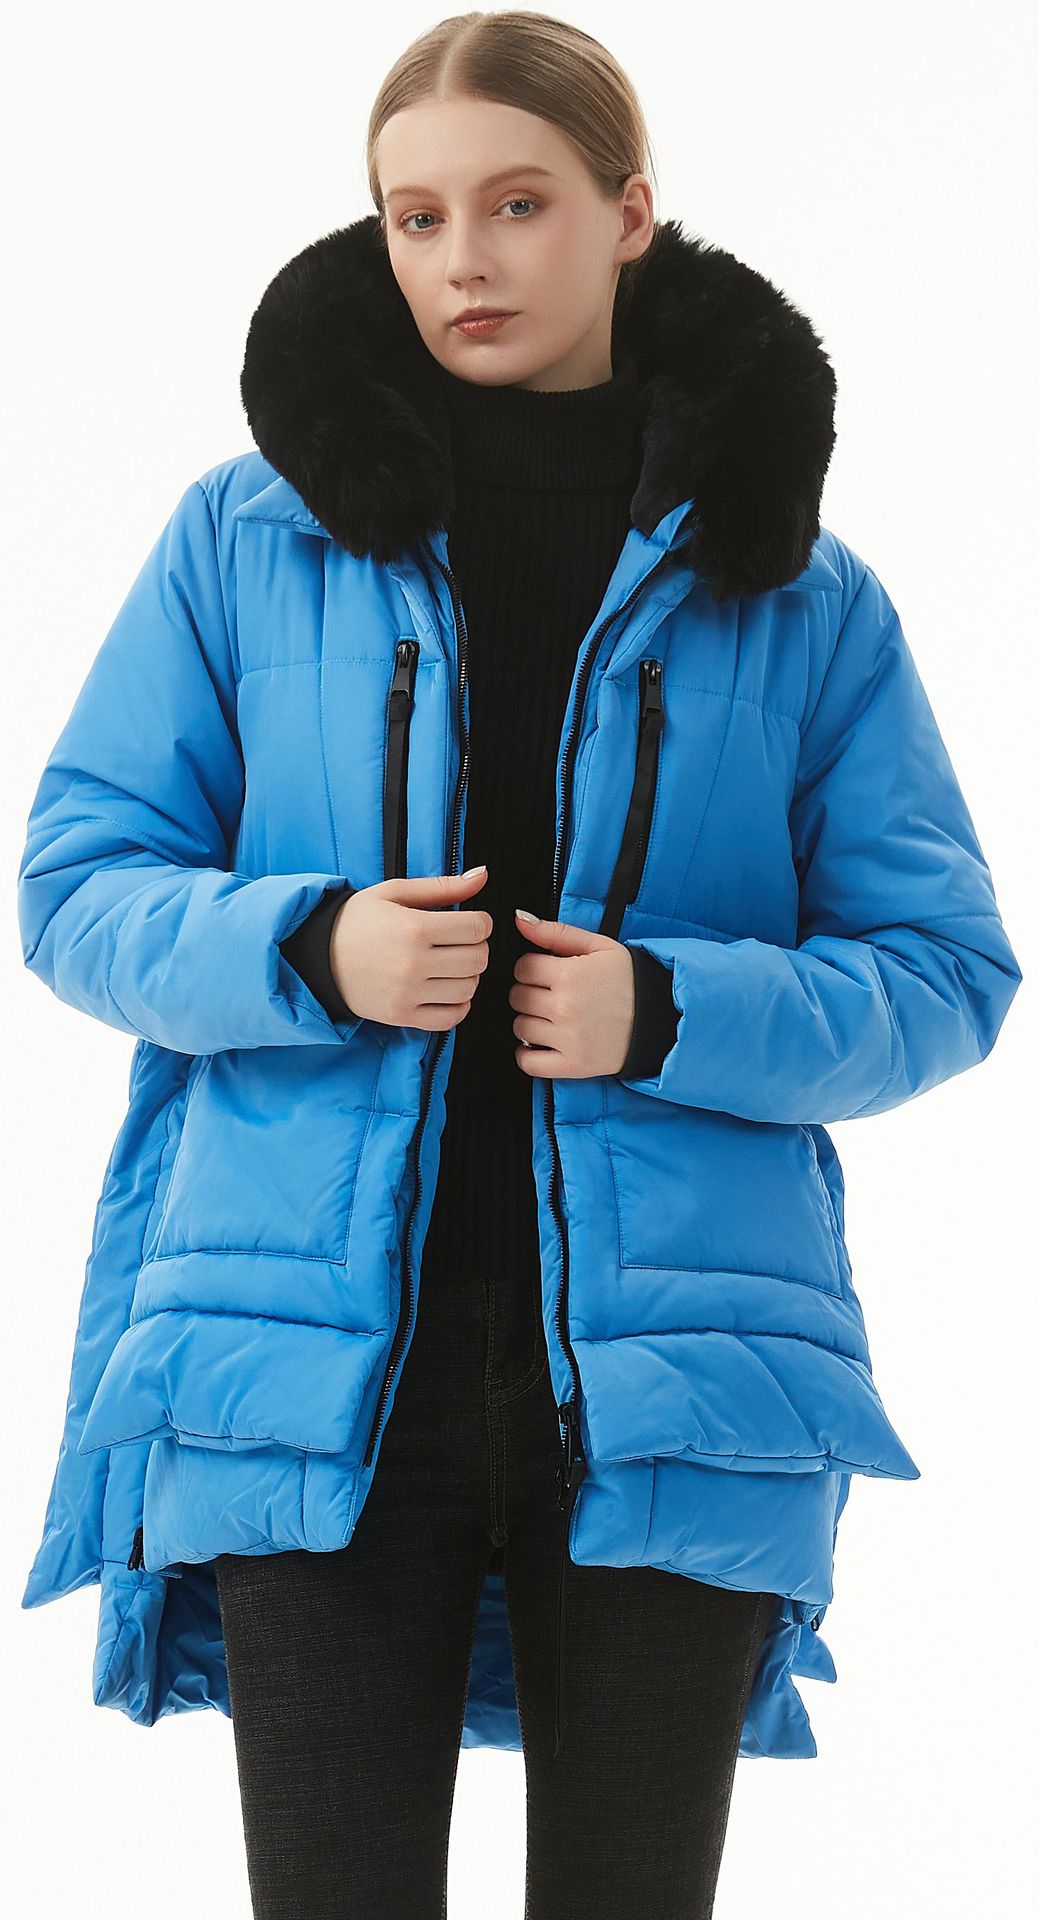 jackets  | Women's Casual Hooded Middle Long Cotton-padded Coat | Denim Blue |  L| thecurvestory.myshopify.com